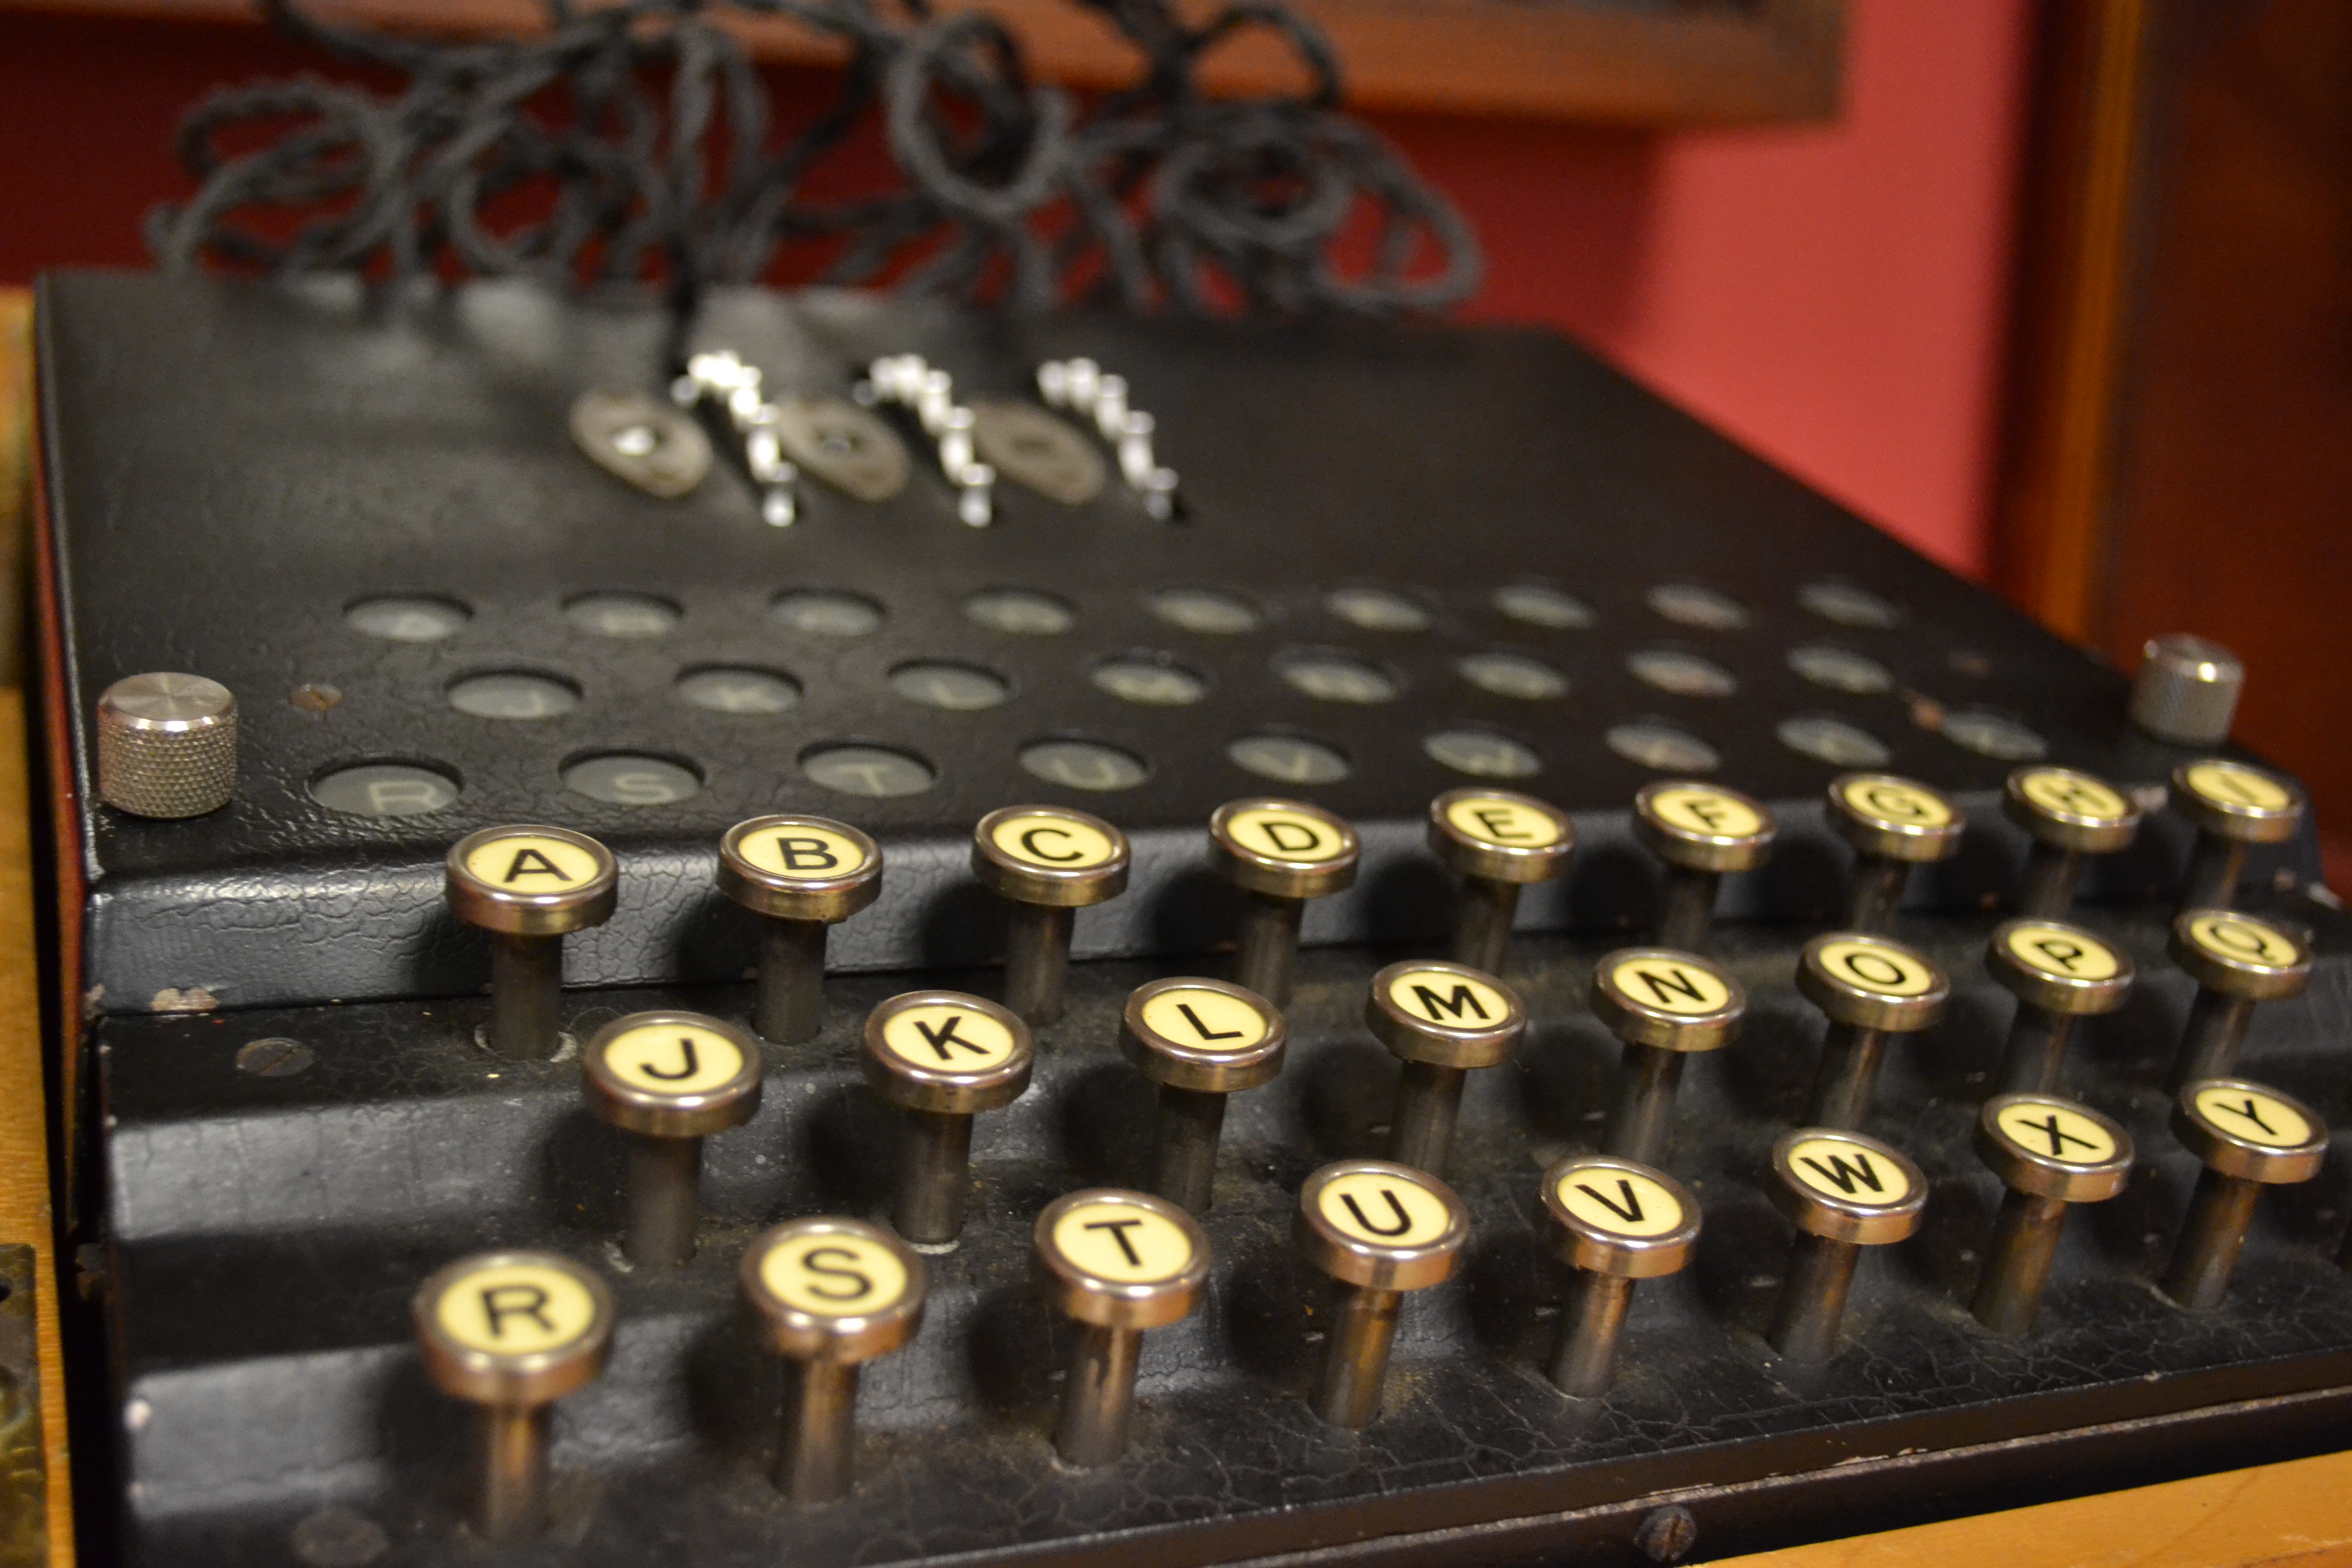 Breaking Enigma A Story Of European Co Operation Science Museum Blog